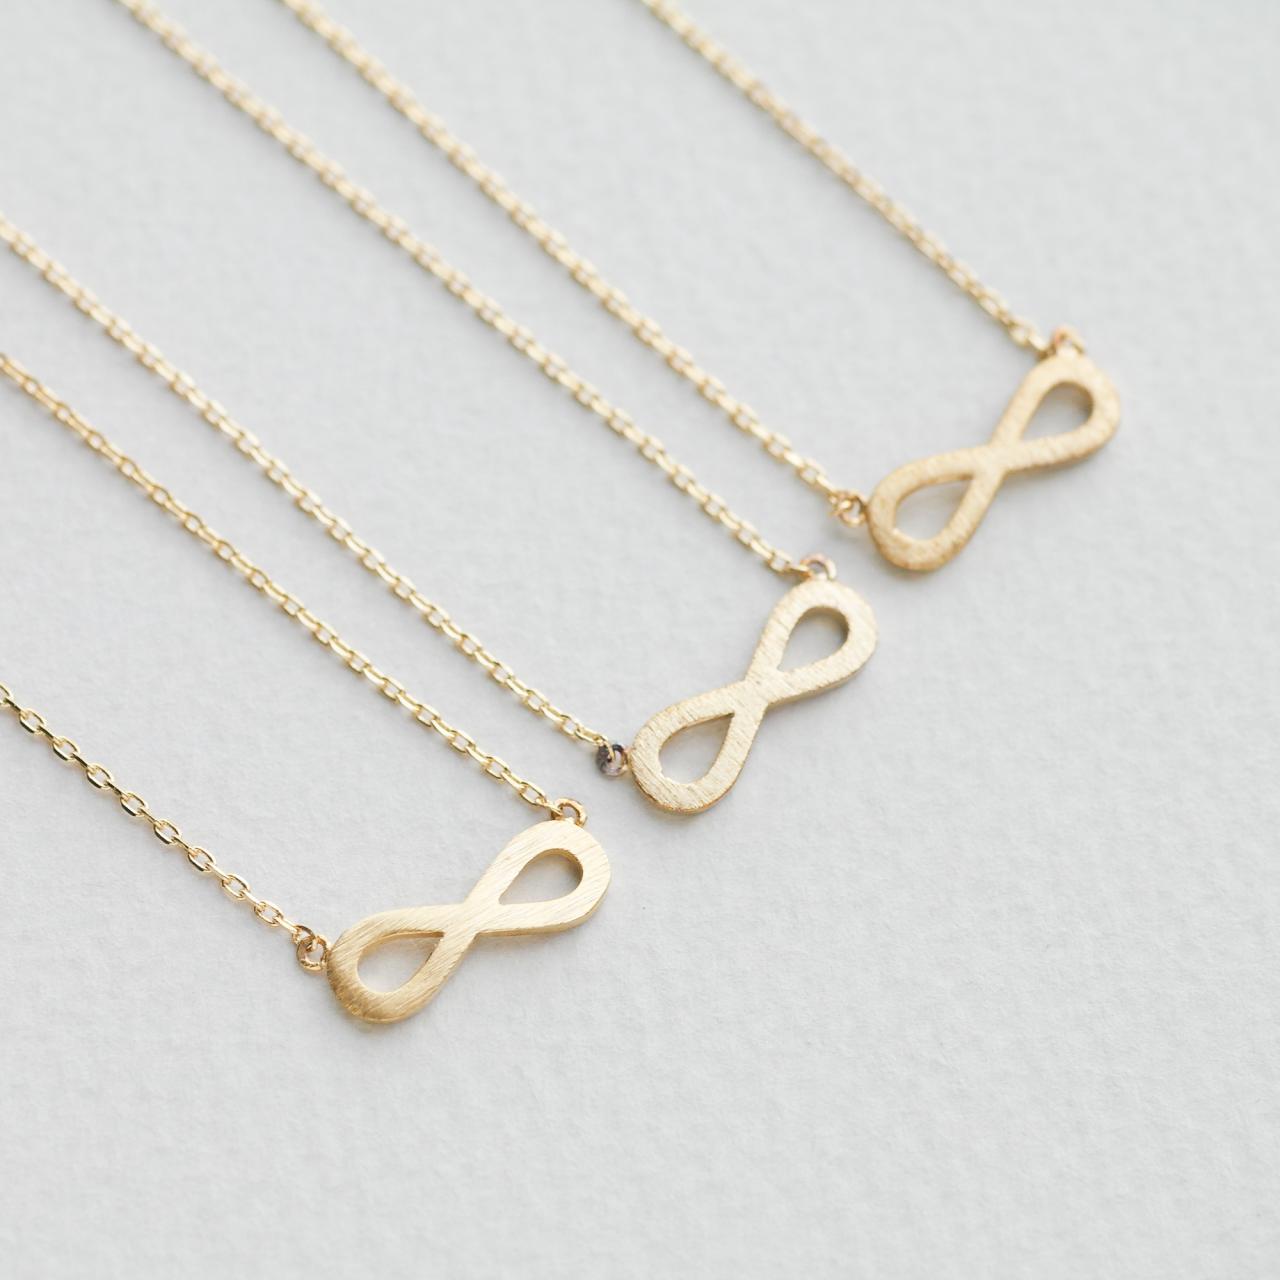 Bridesmaid gifts - Set of 5pcs - Simple falt infinity necklace